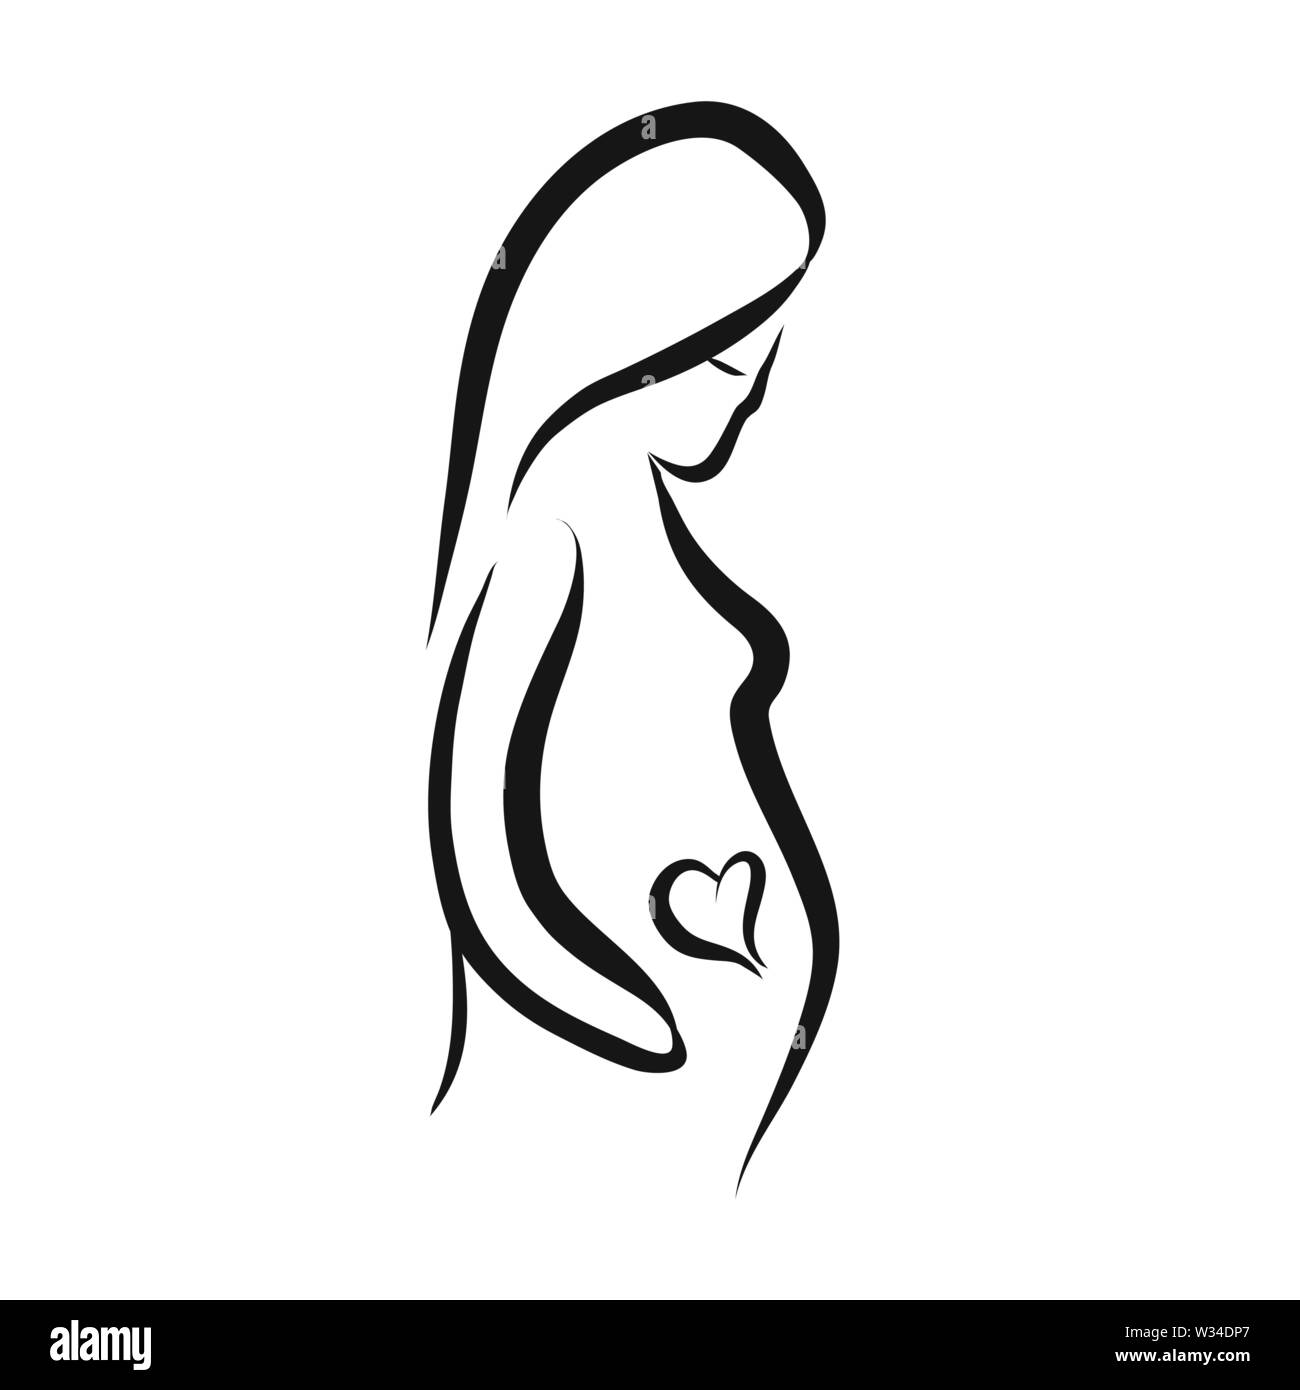 Pregnant woman with heart inside. Hand-drawn logo symbol for t-shirt prints and online marketing. Stock Vector